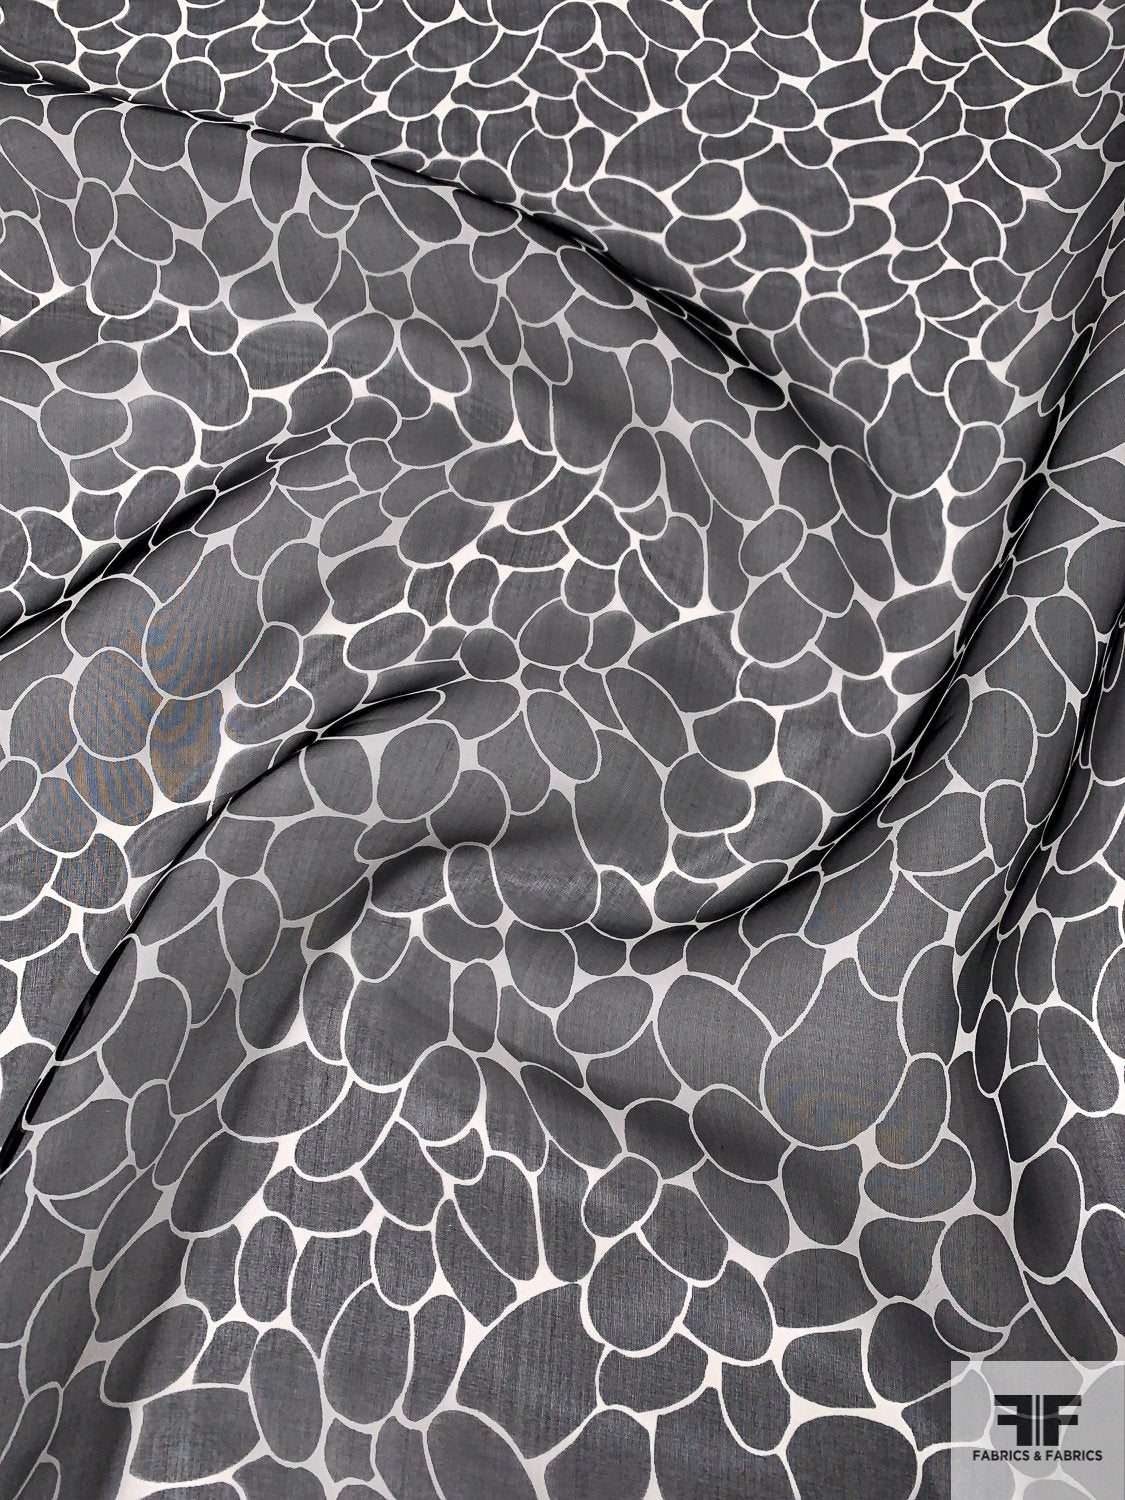 Overlapping Ovals Printed Silk Organza - Black/White